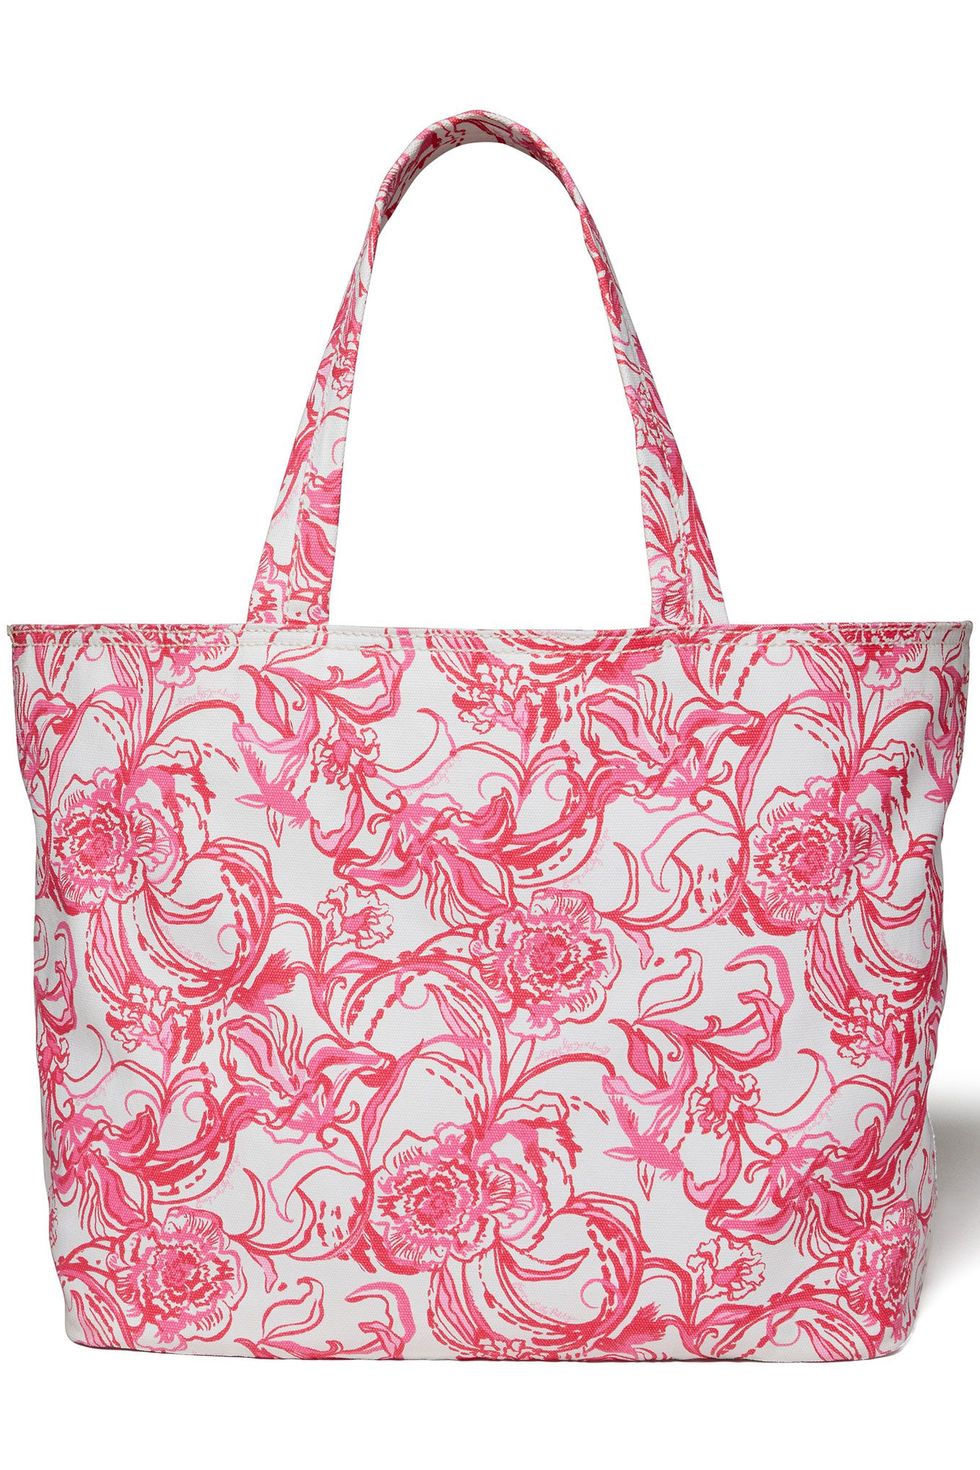 Lilly Pulitzer x Goop Palm Beach Tote